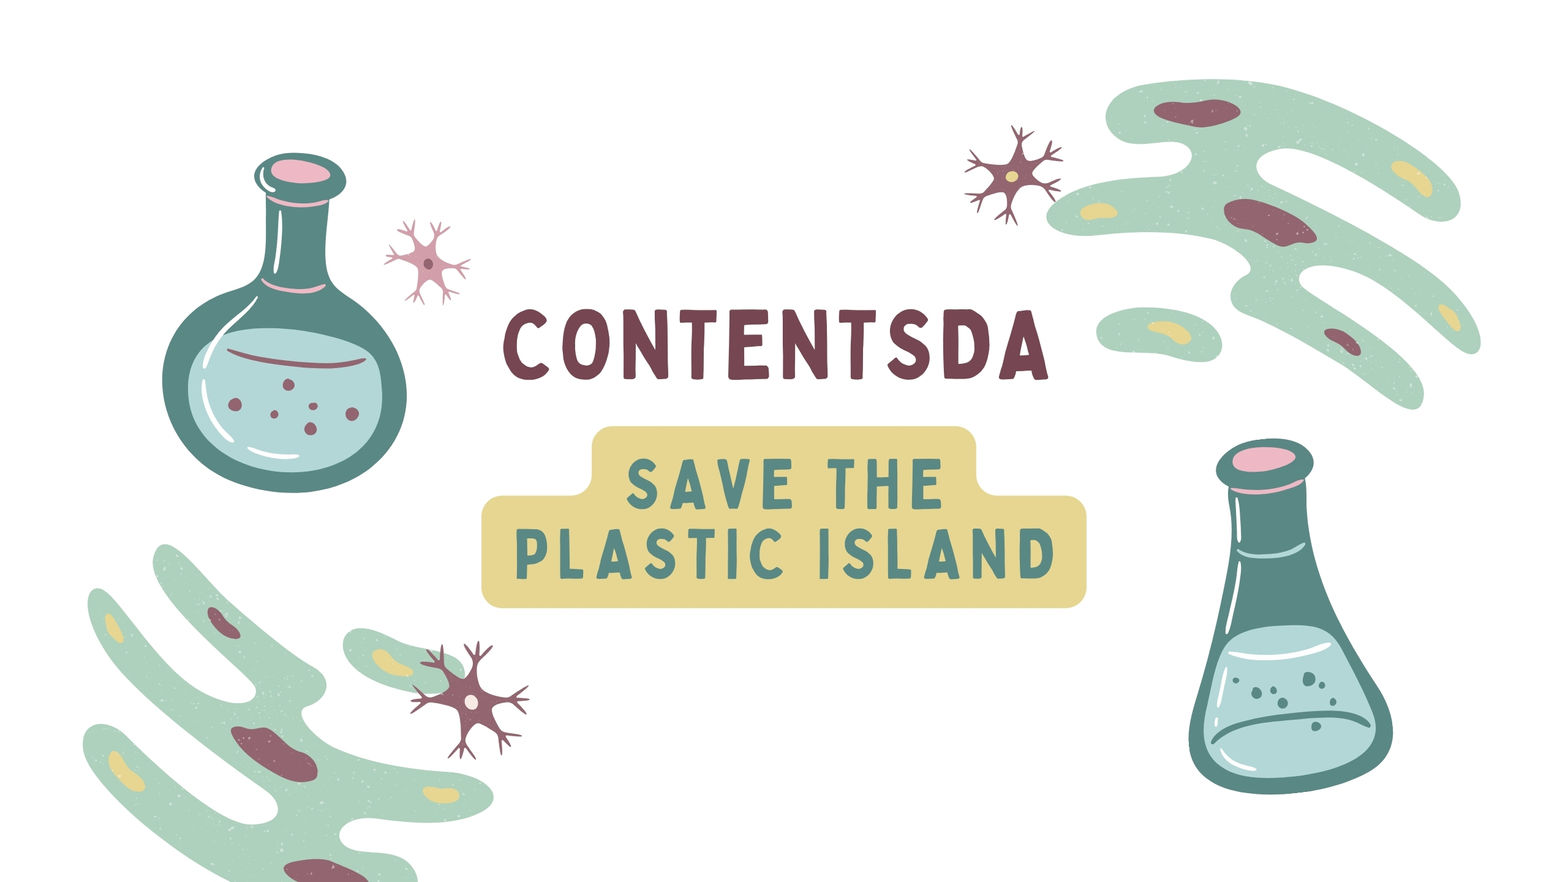 Save The Plastic Island - ContentsDa Science Experiment